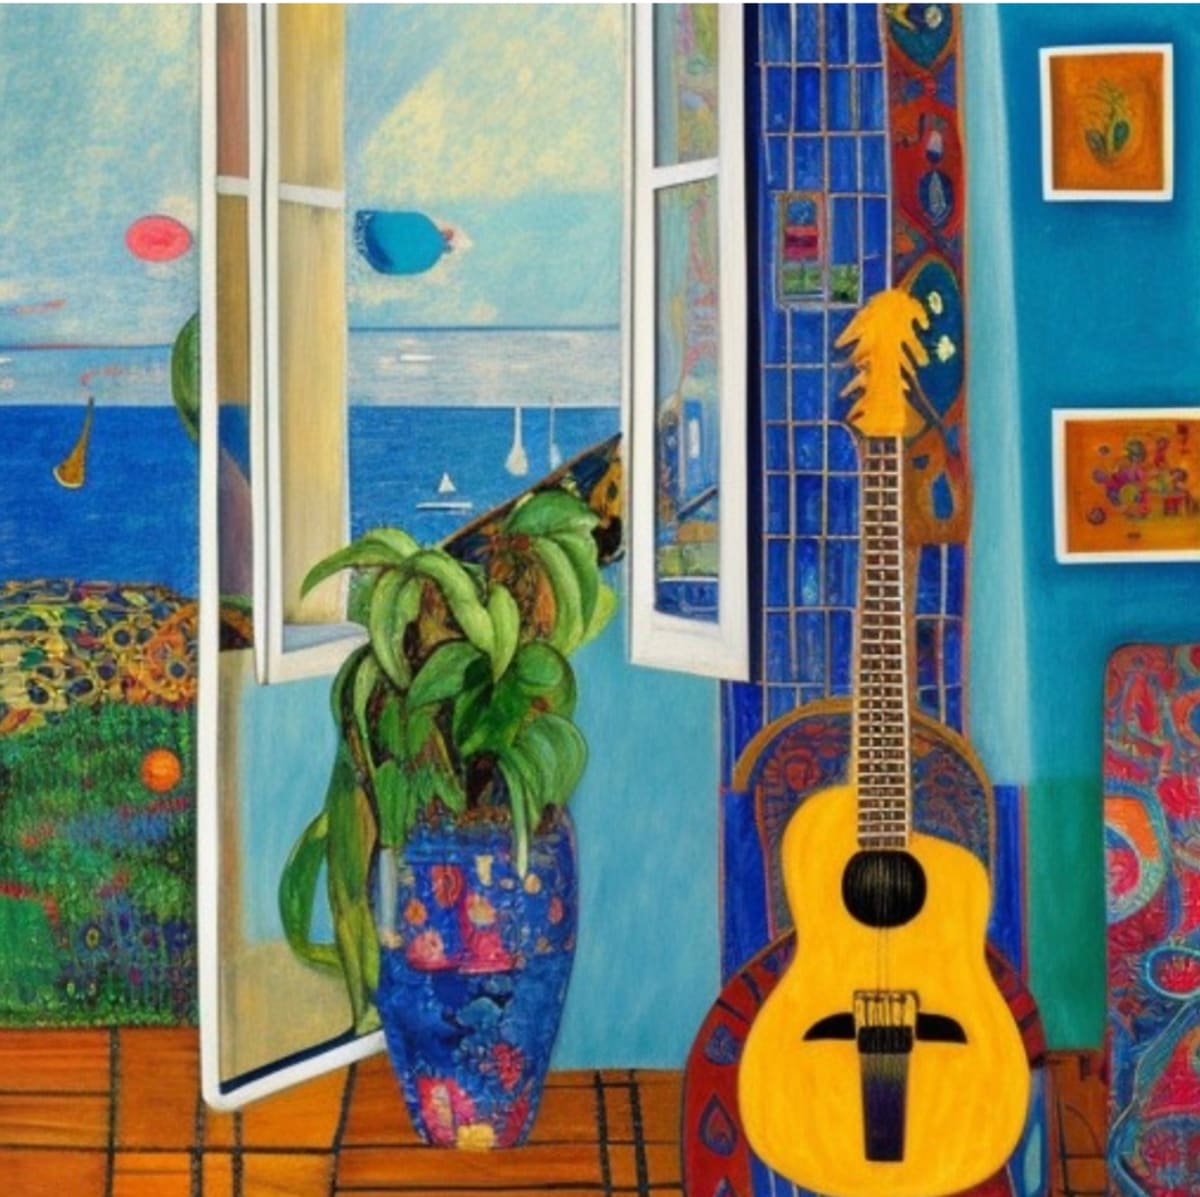 Music Room Study 3 by Karla Cohen  Image: Inspired by Miro, original painting 